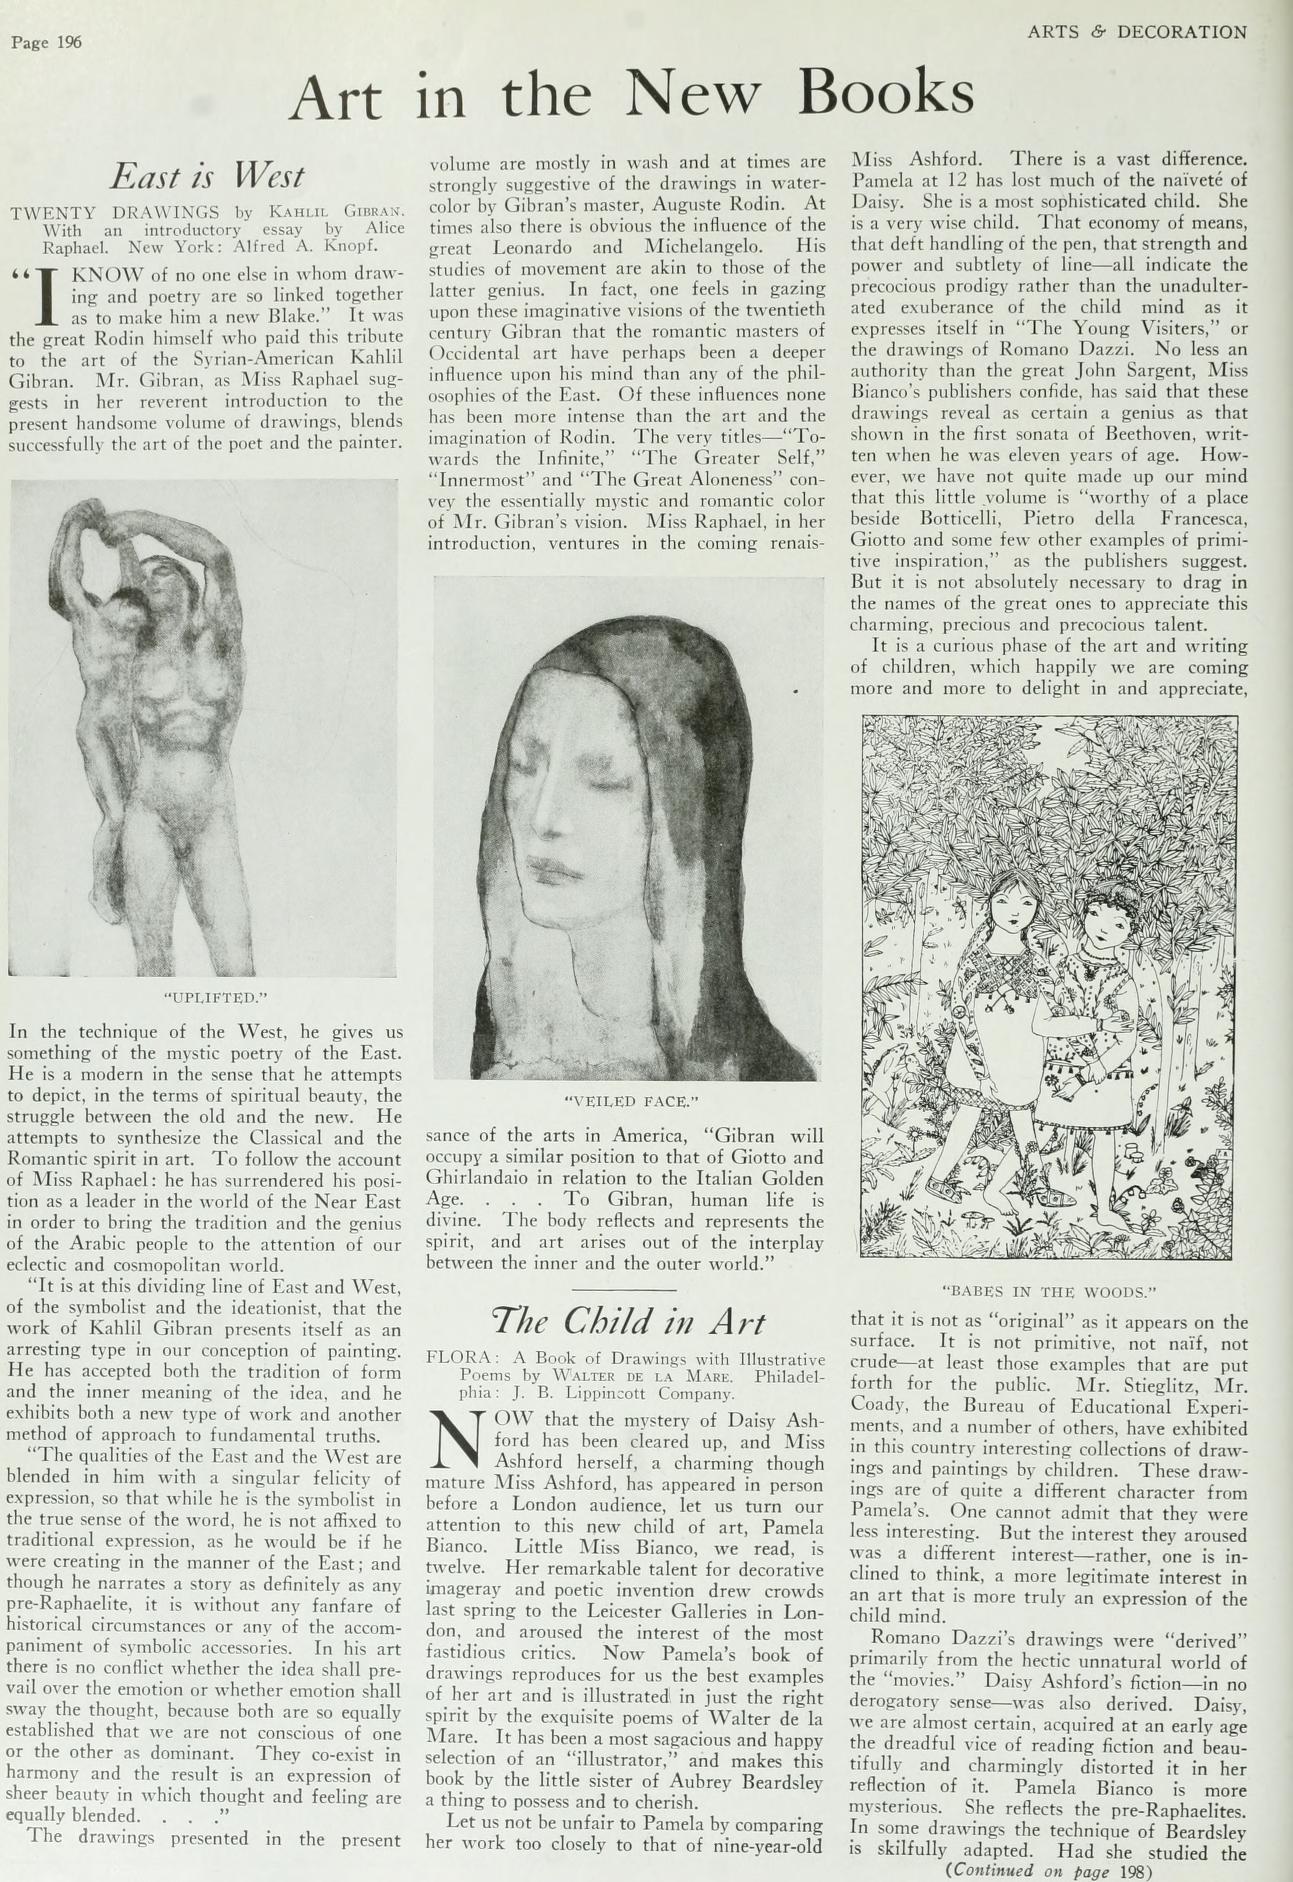 "East is West: A Review of 'Twenty Drawings' by Kahlil Gibran", Arts & Decoration, New York, Jan. 1920, p. 196.